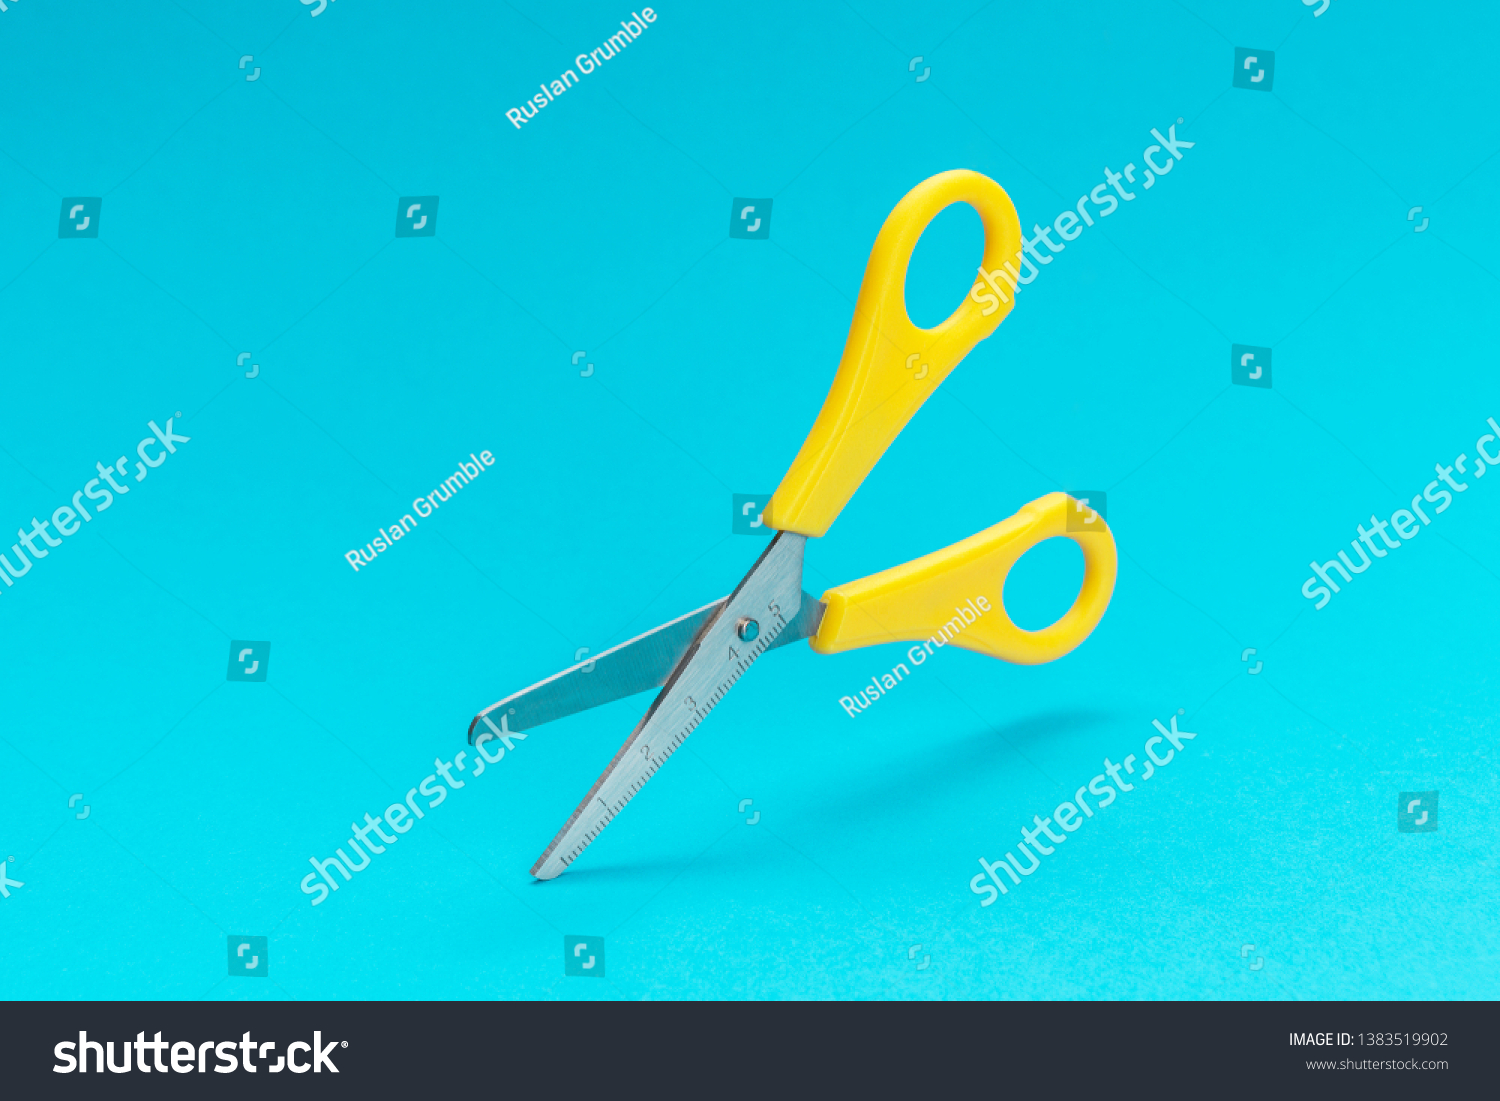 opened yellow scissors over turquoise blue background. conceptual photo of levitating scissors with central composition #1383519902